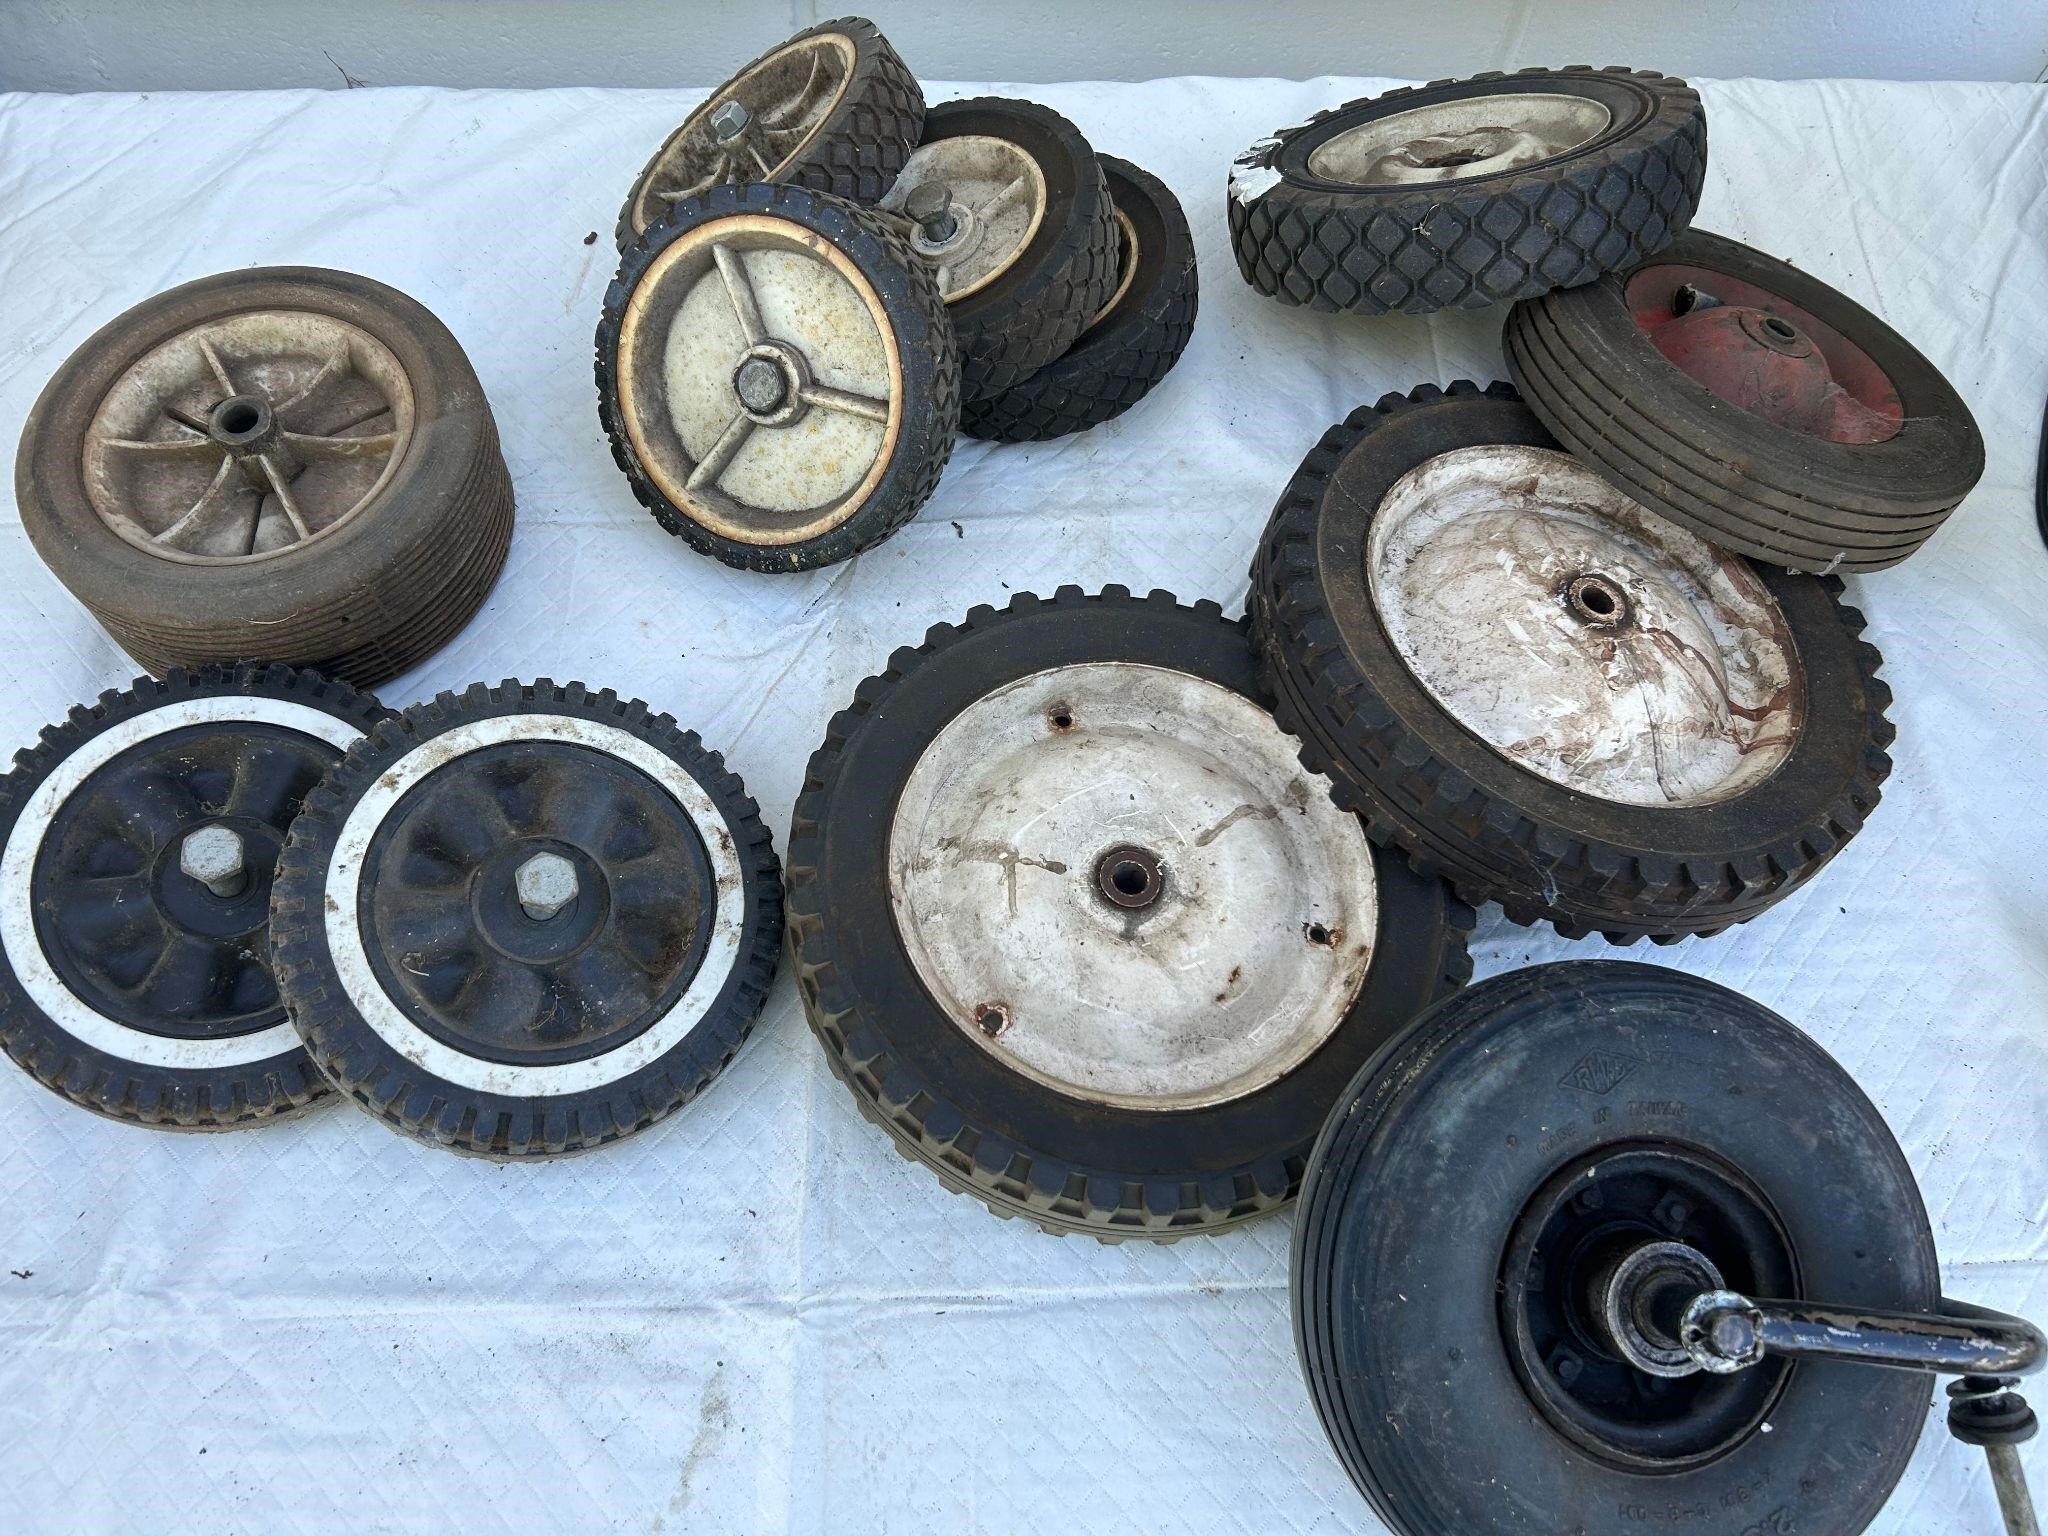 Assorted Lawn Tires